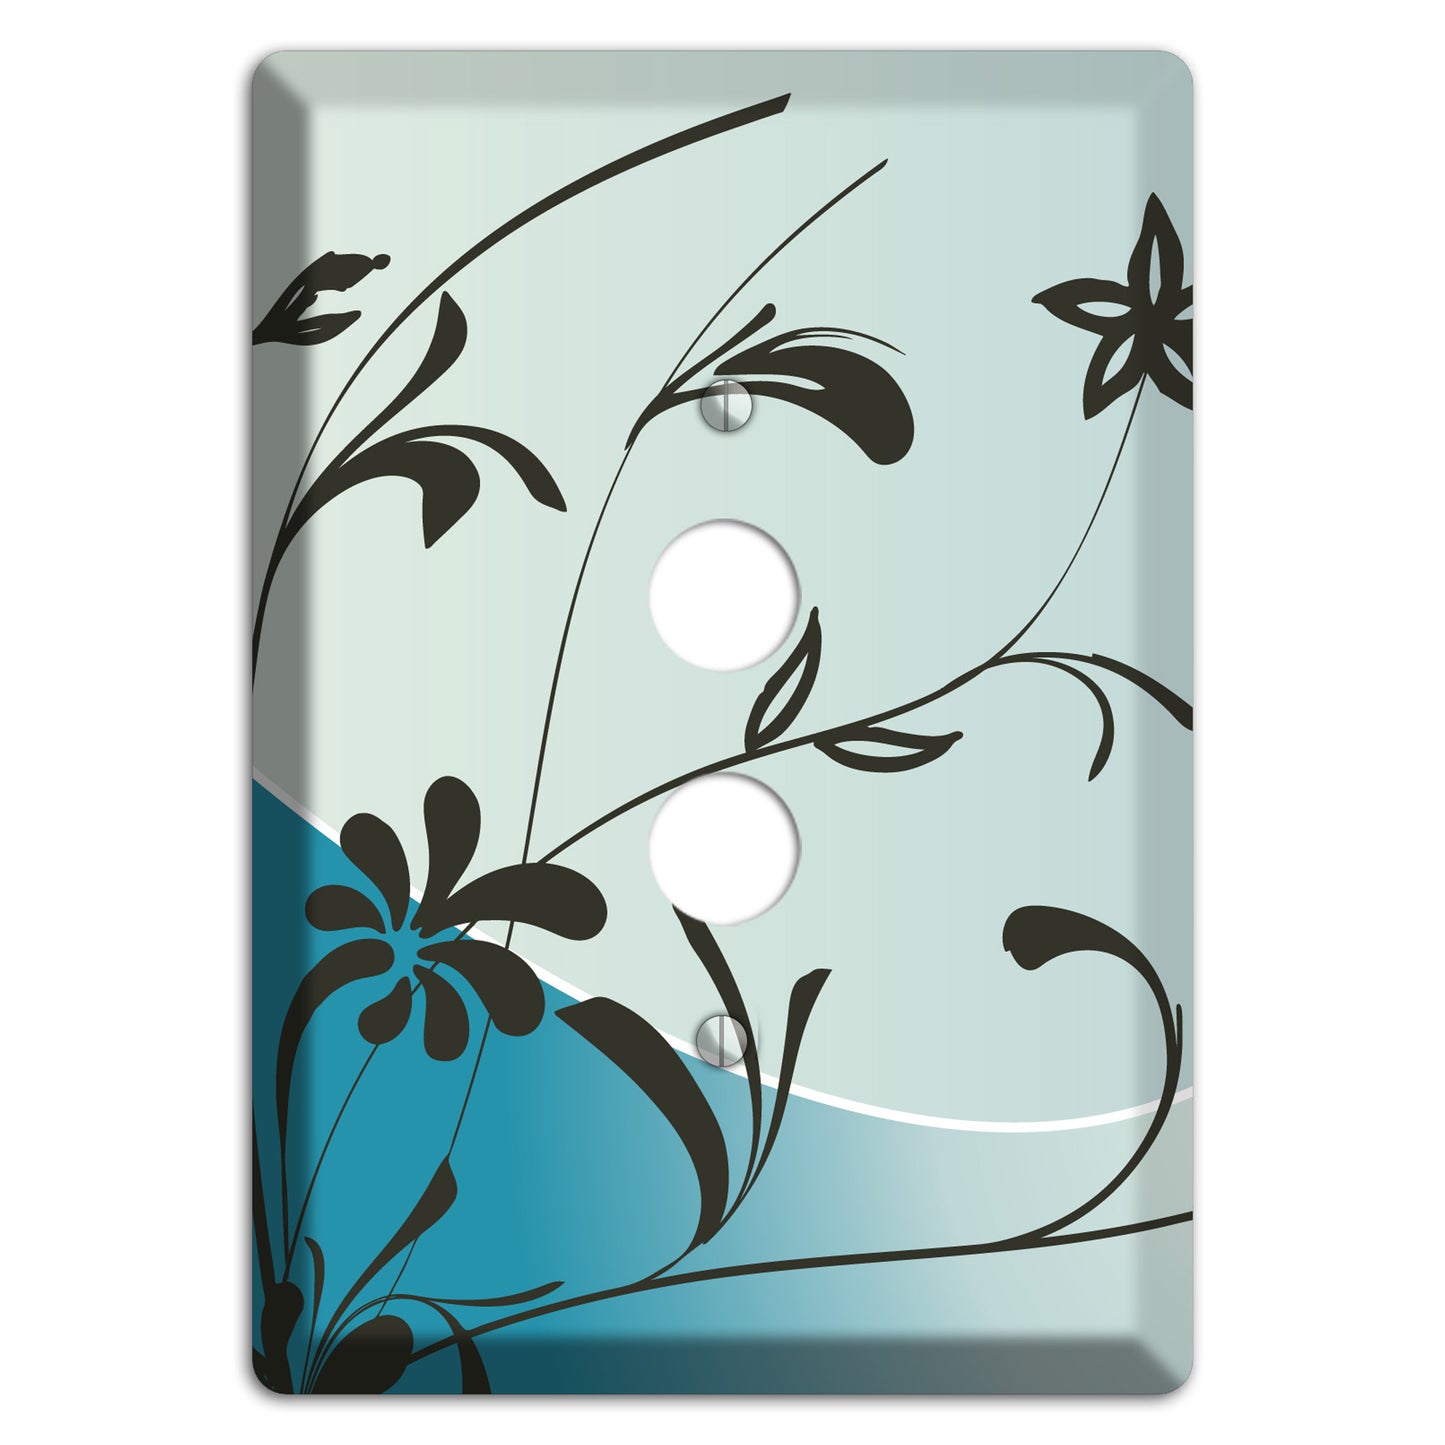 Blue-grey Floral Sprig 1 Pushbutton Wallplate